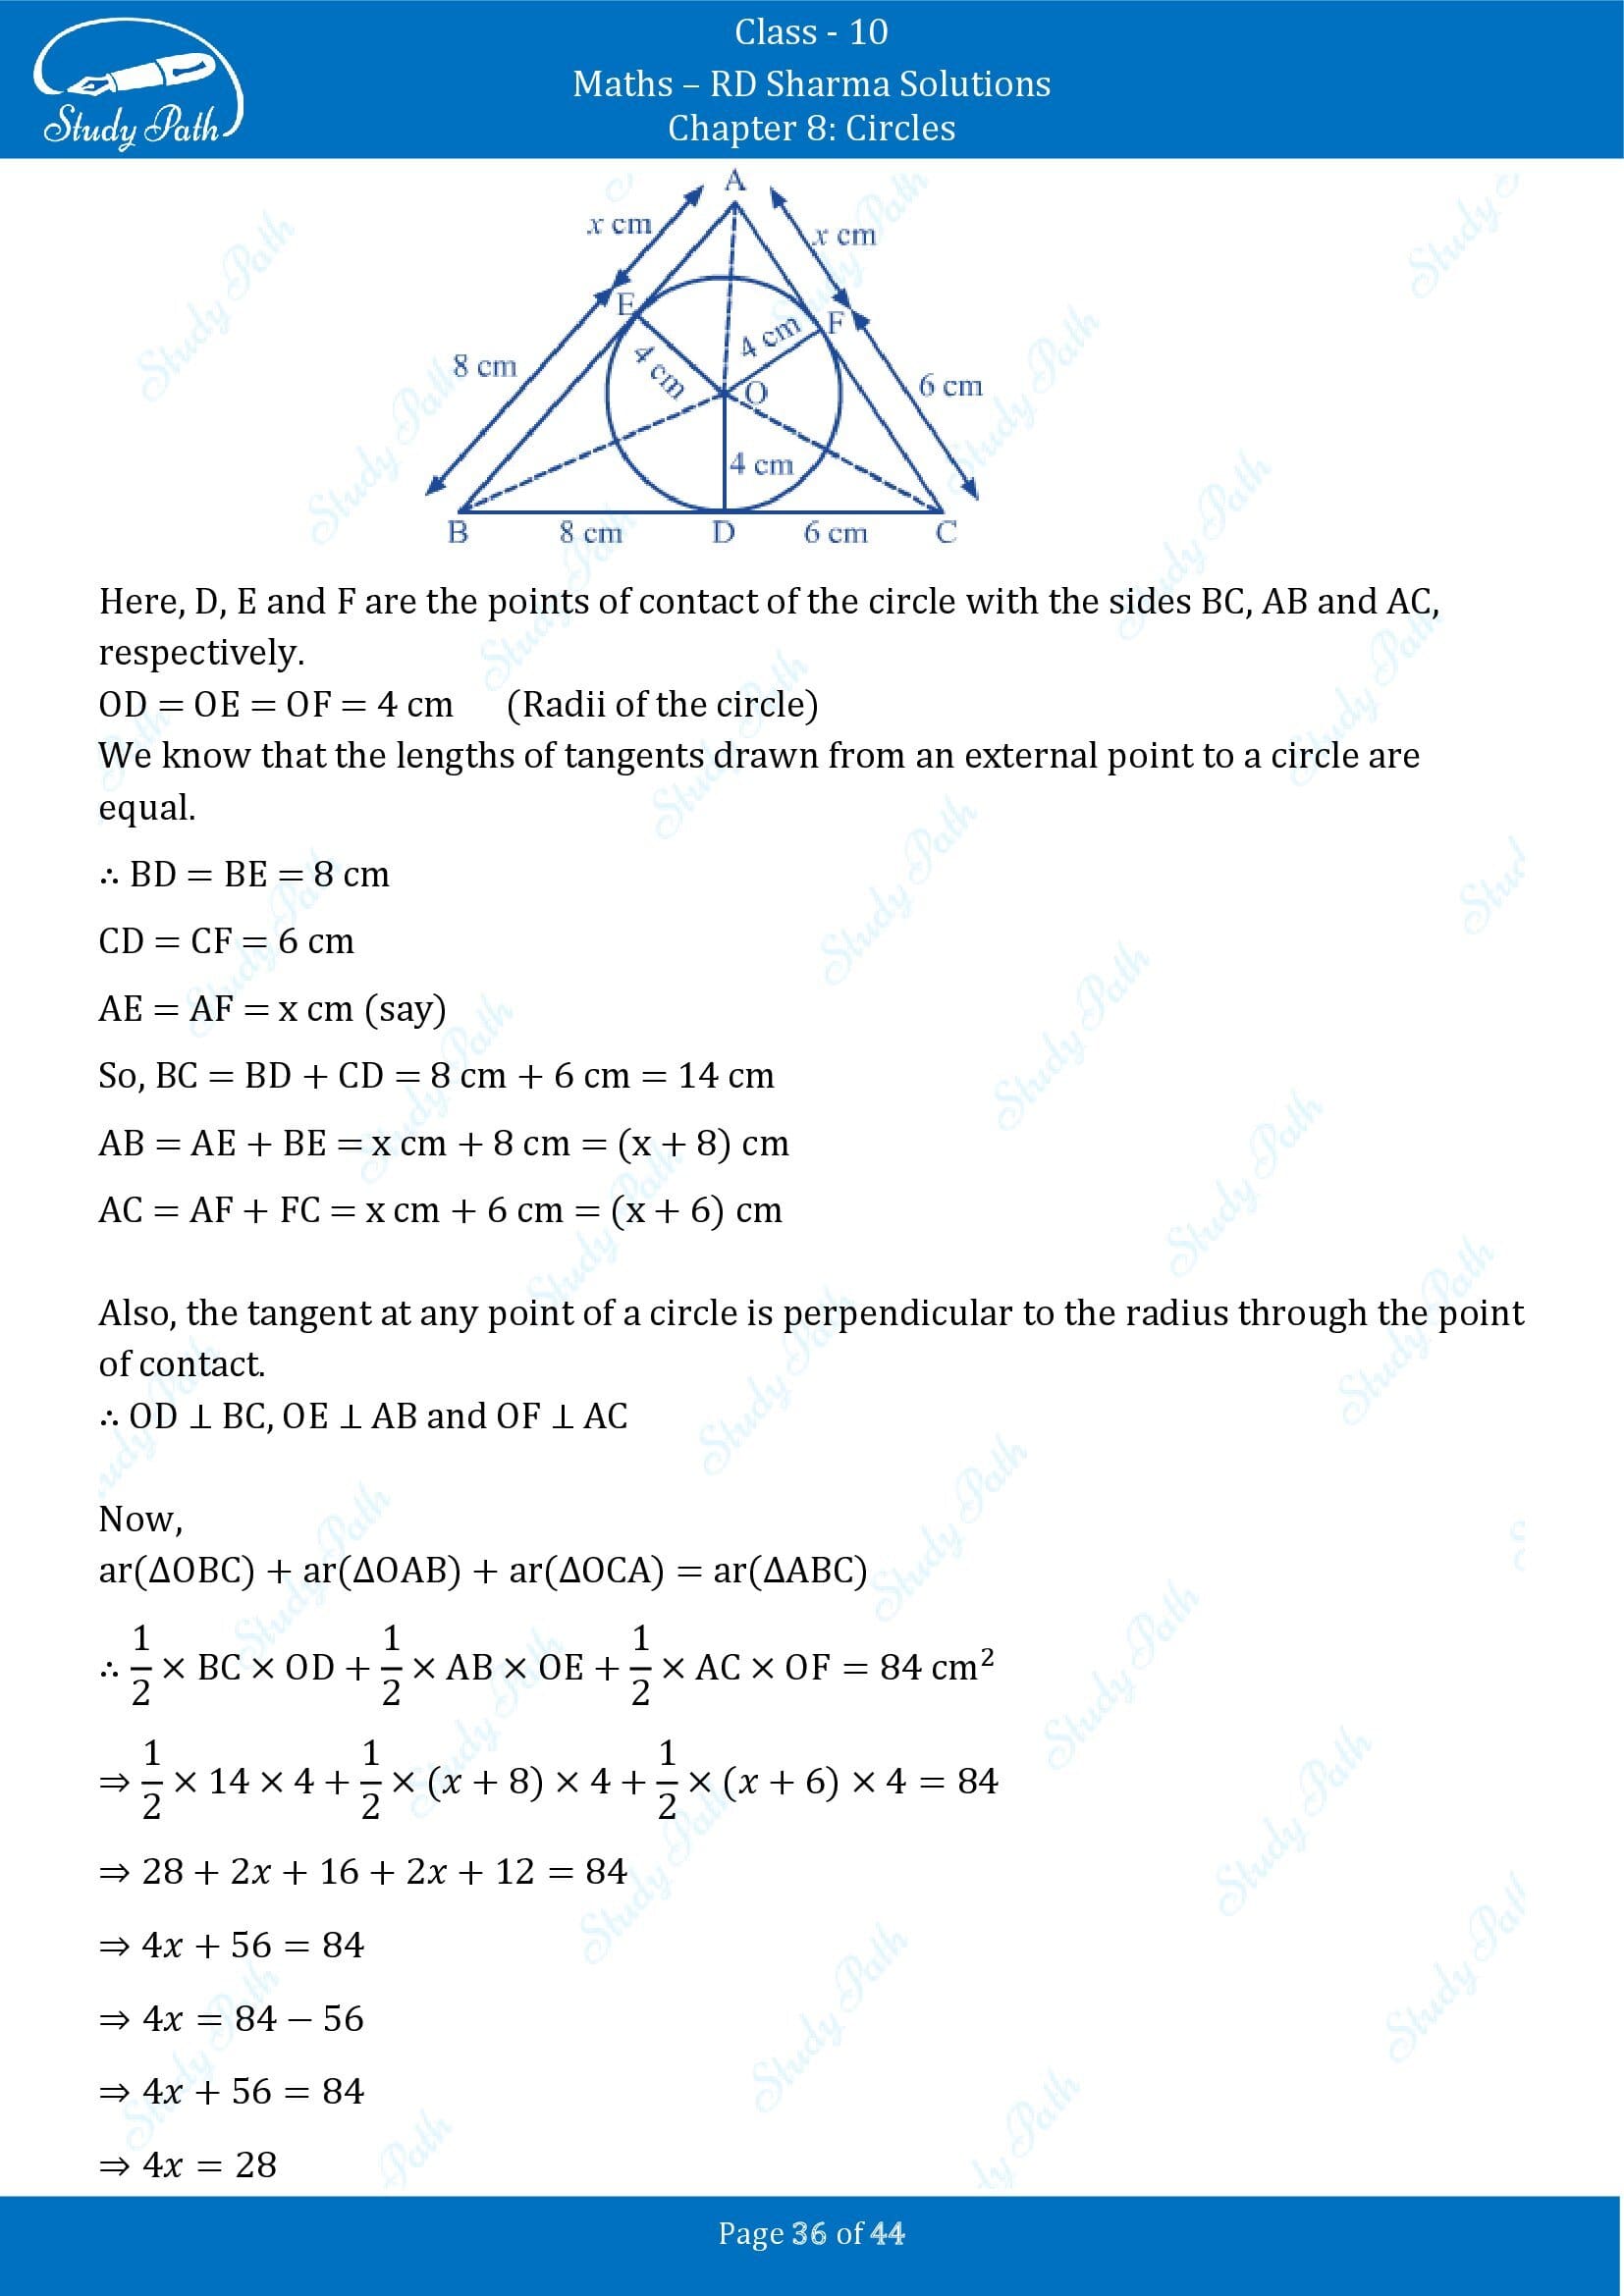 RD Sharma Solutions Class 10 Chapter 8 Circles Exercise 8.2 00036